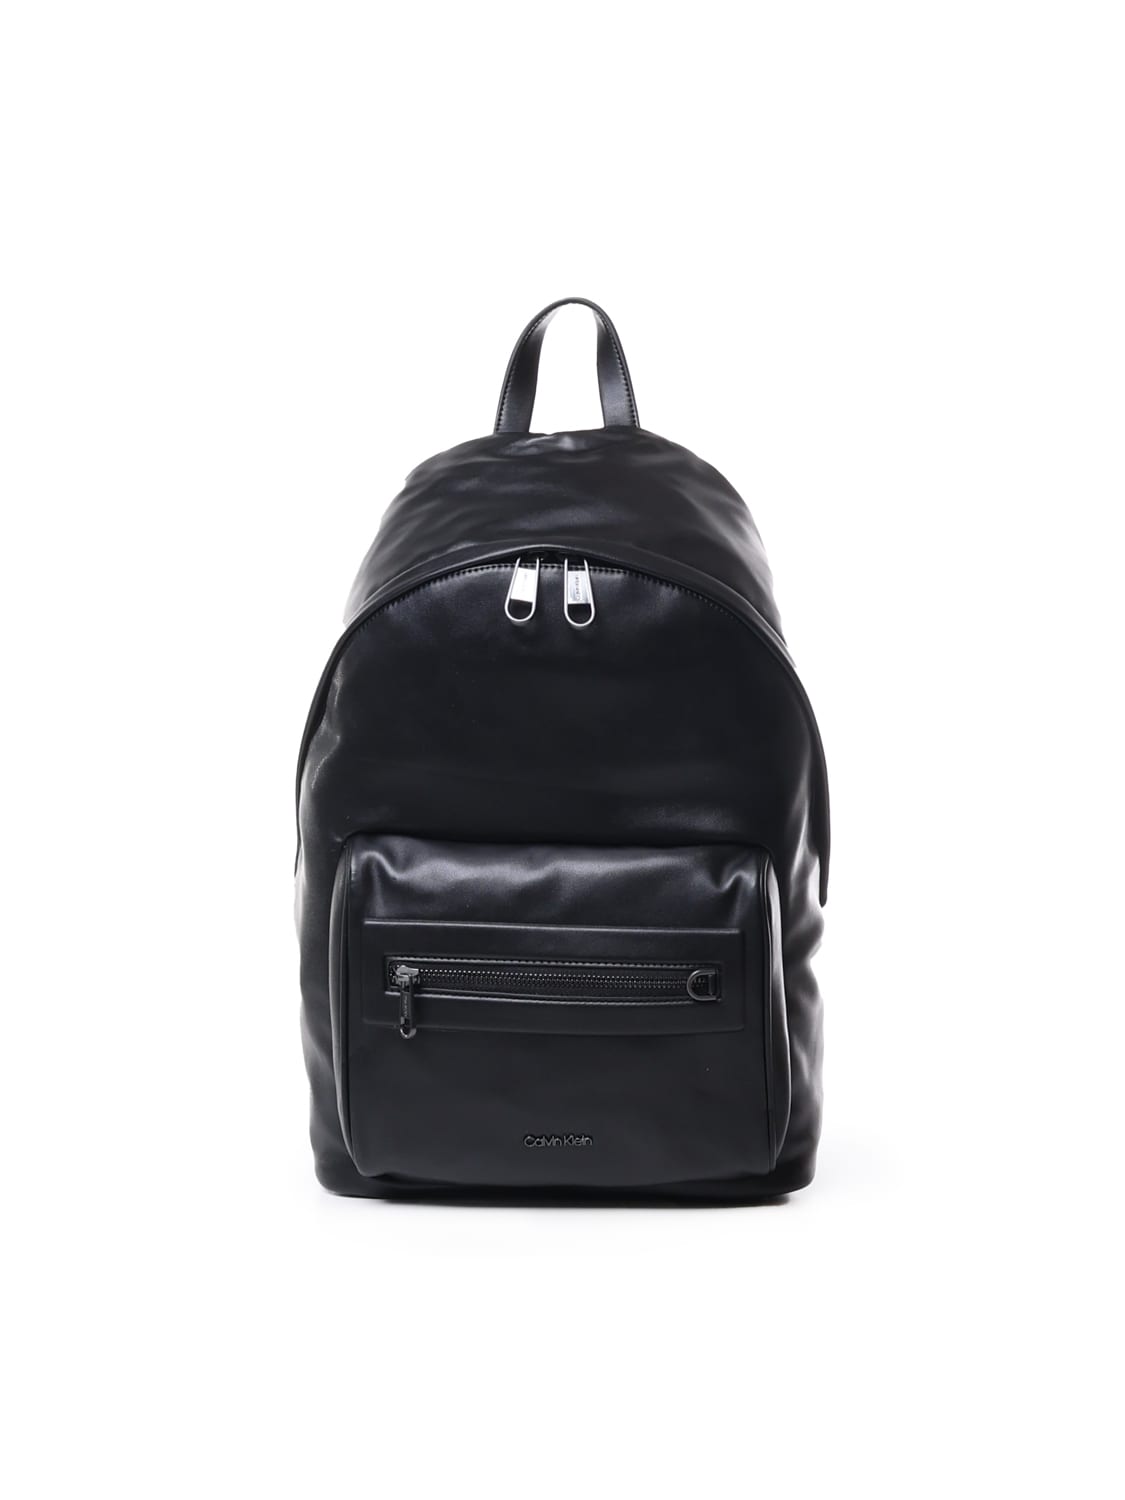 Calvin Klein Faux Leather Backpack In Balck